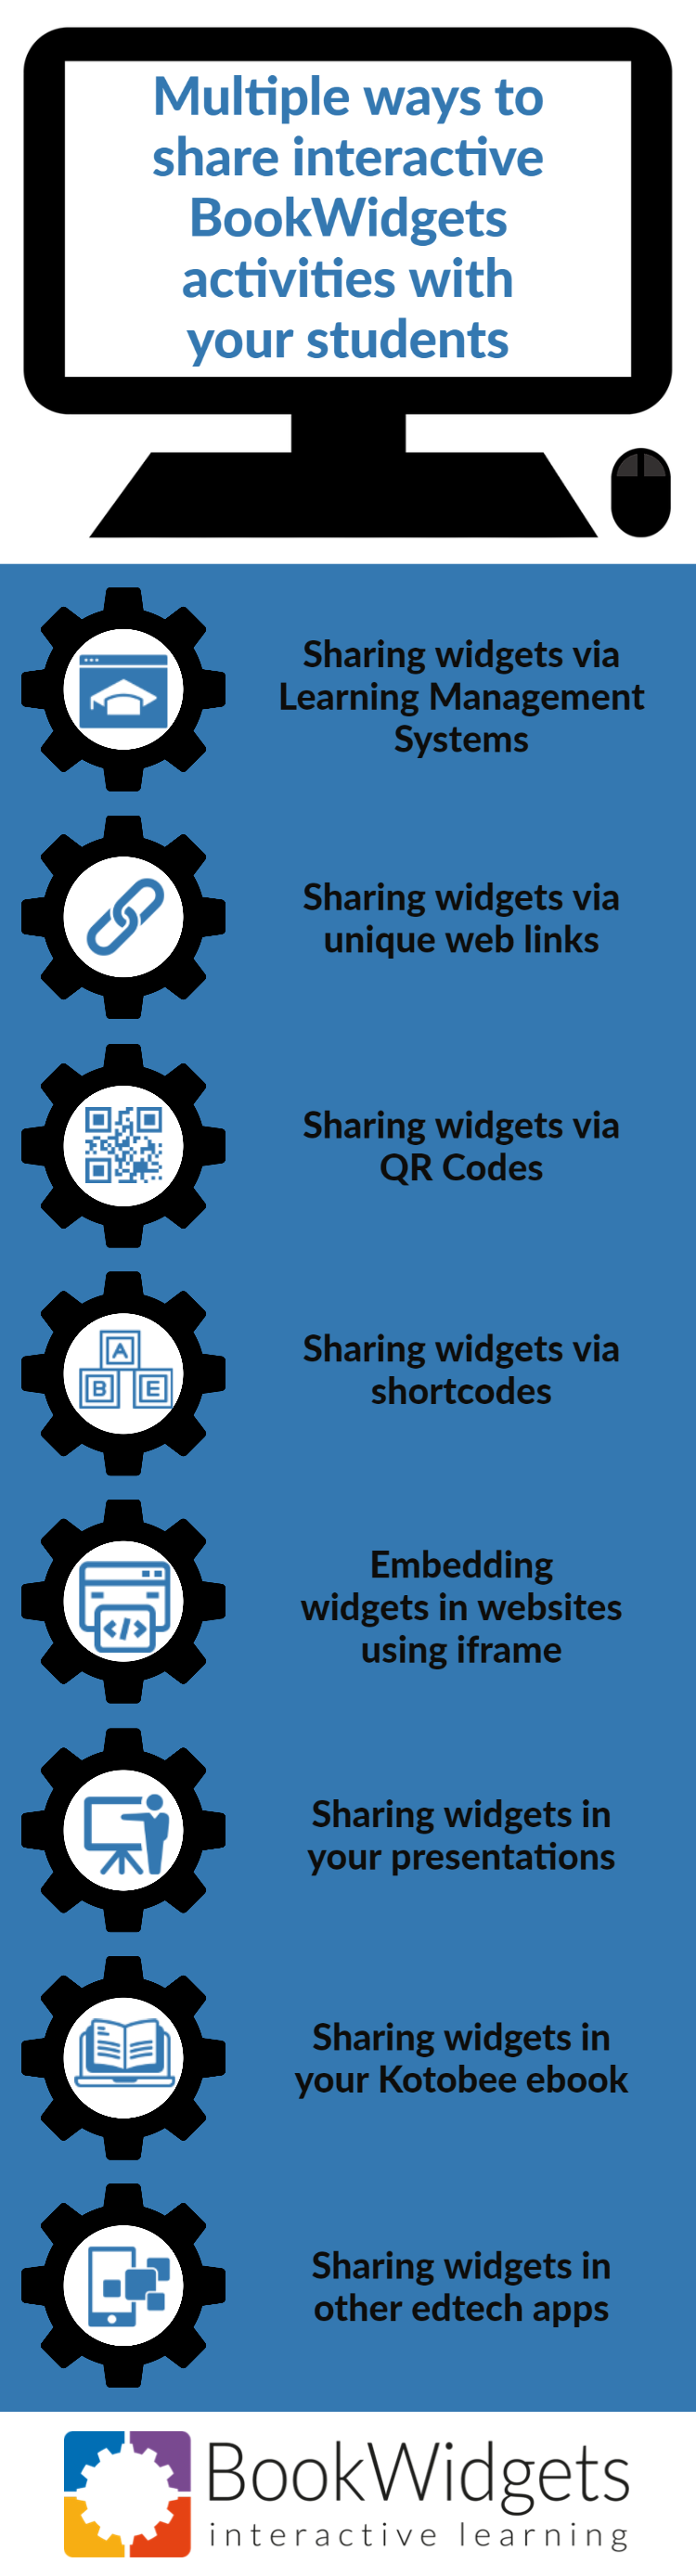 Multiple ways to share widgets with your students